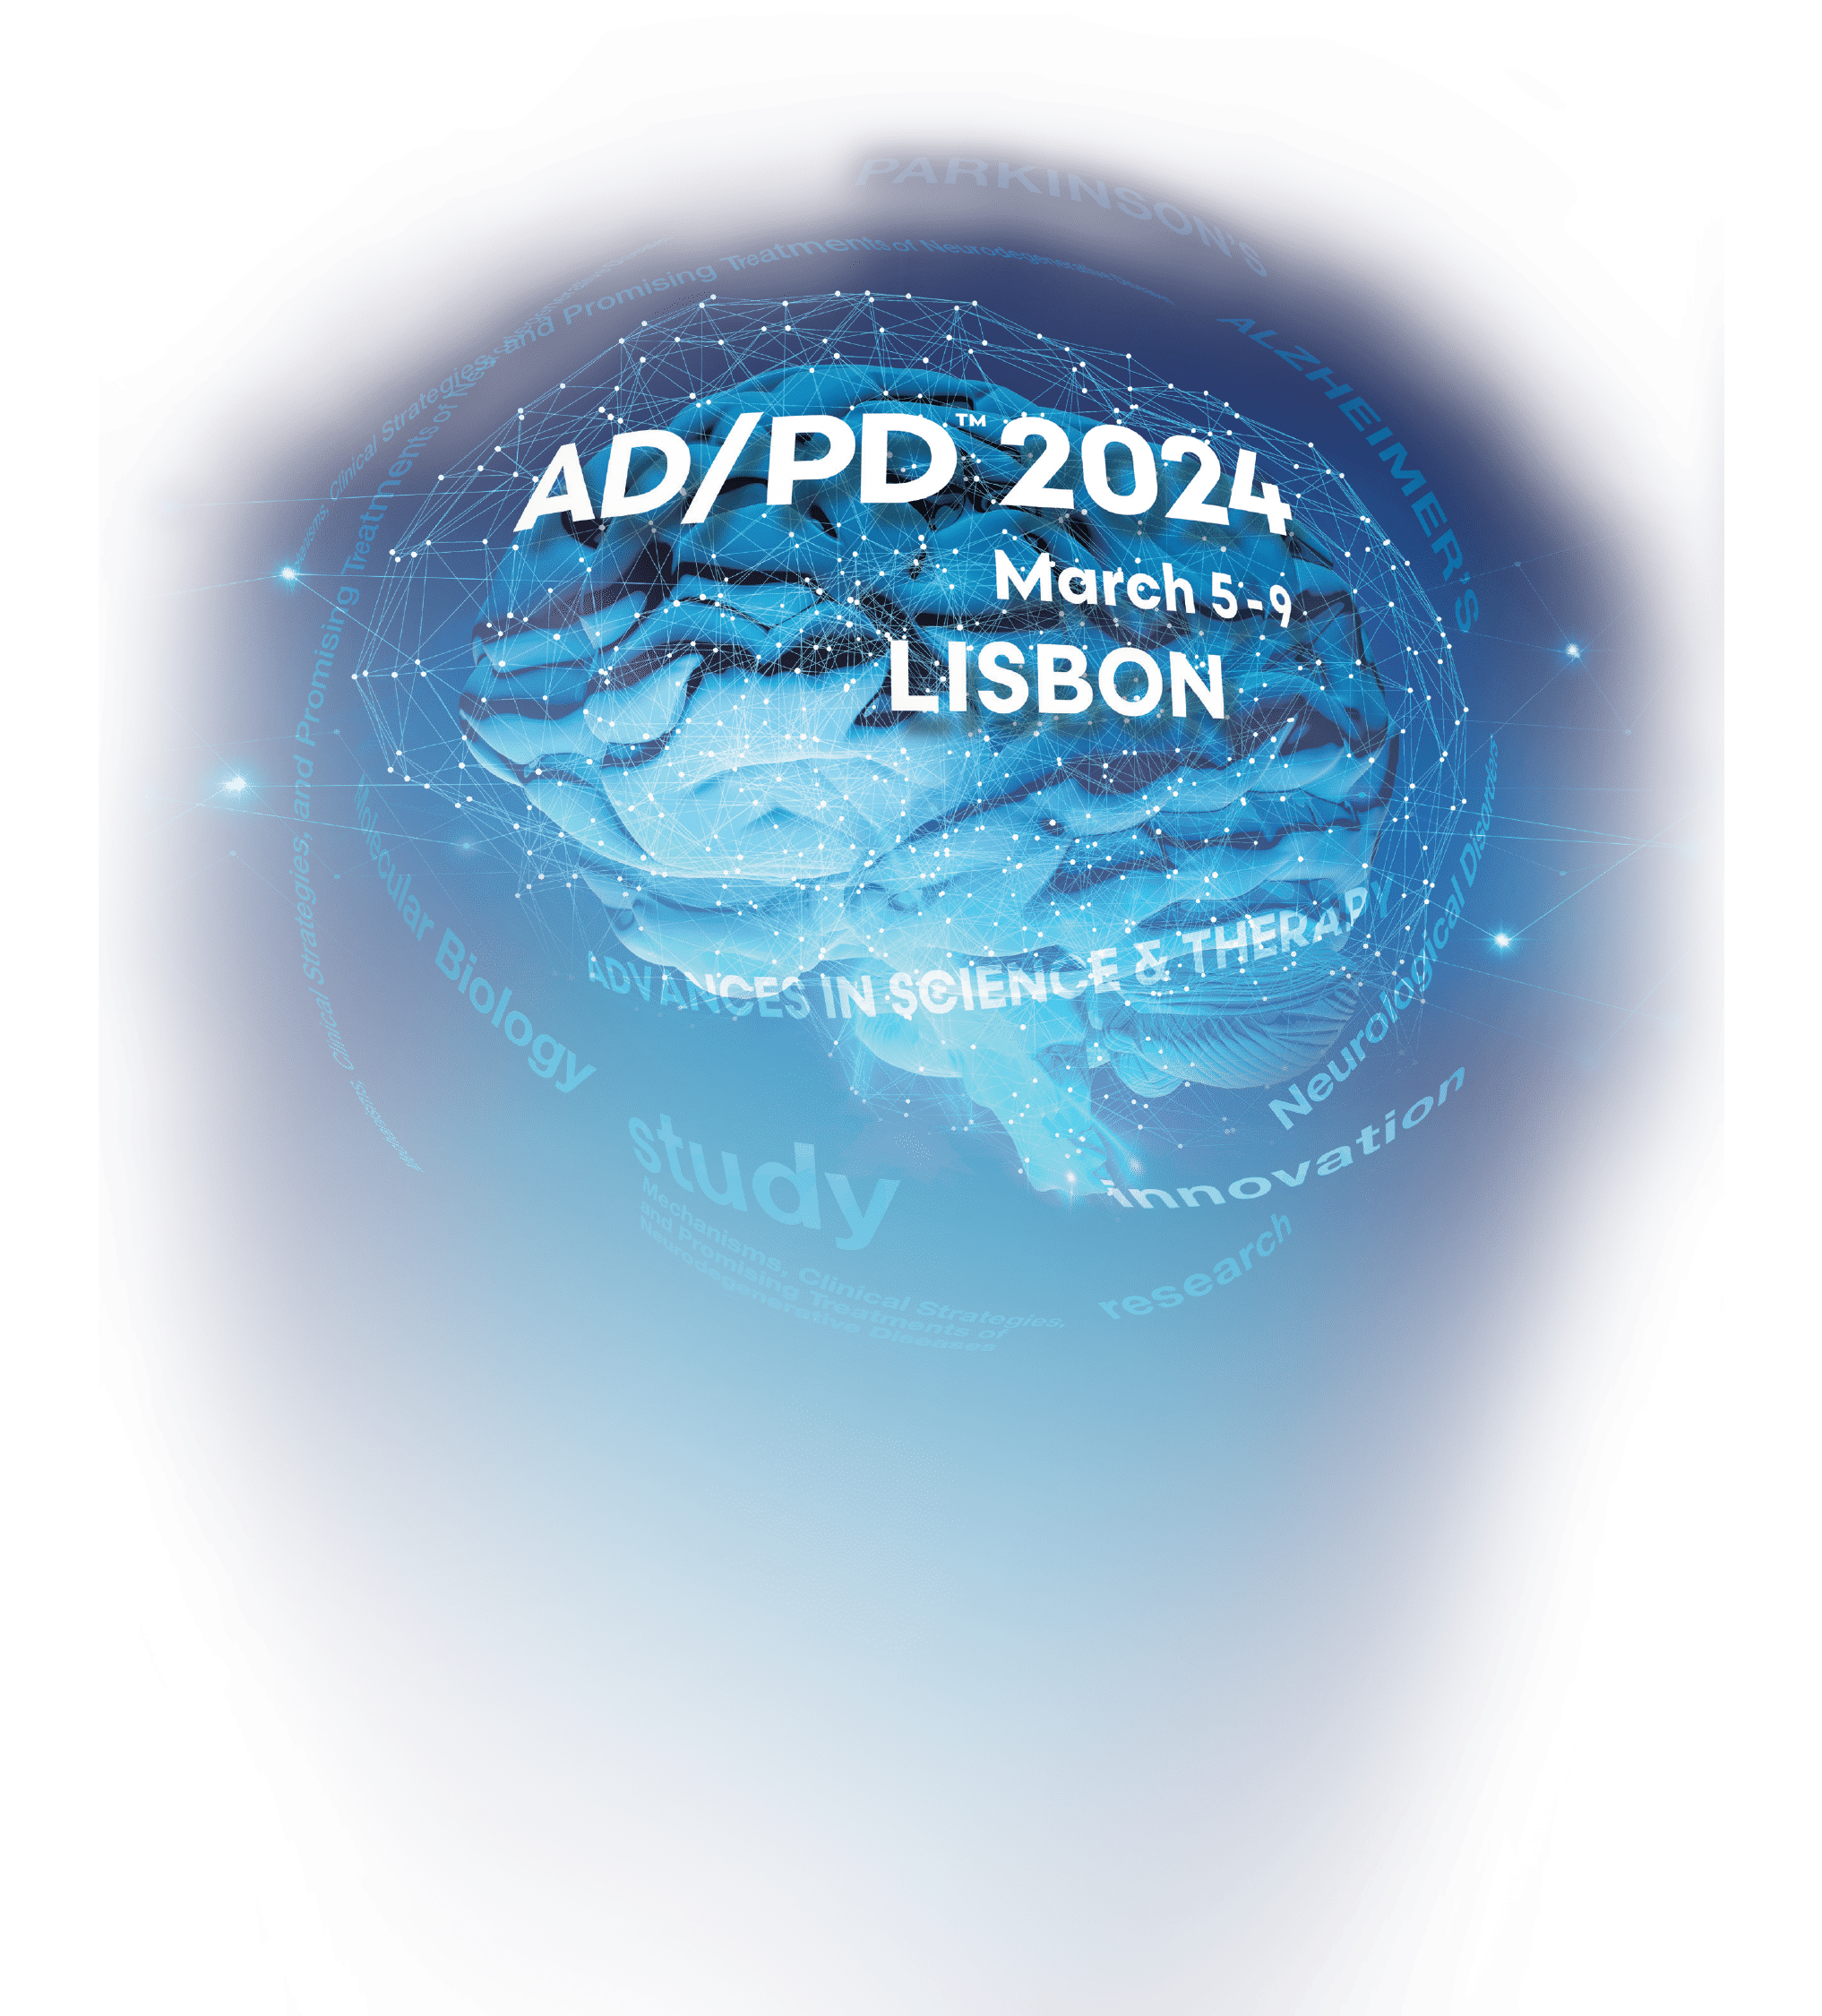 AD/PD Booth 35, Lisbon, Portugal